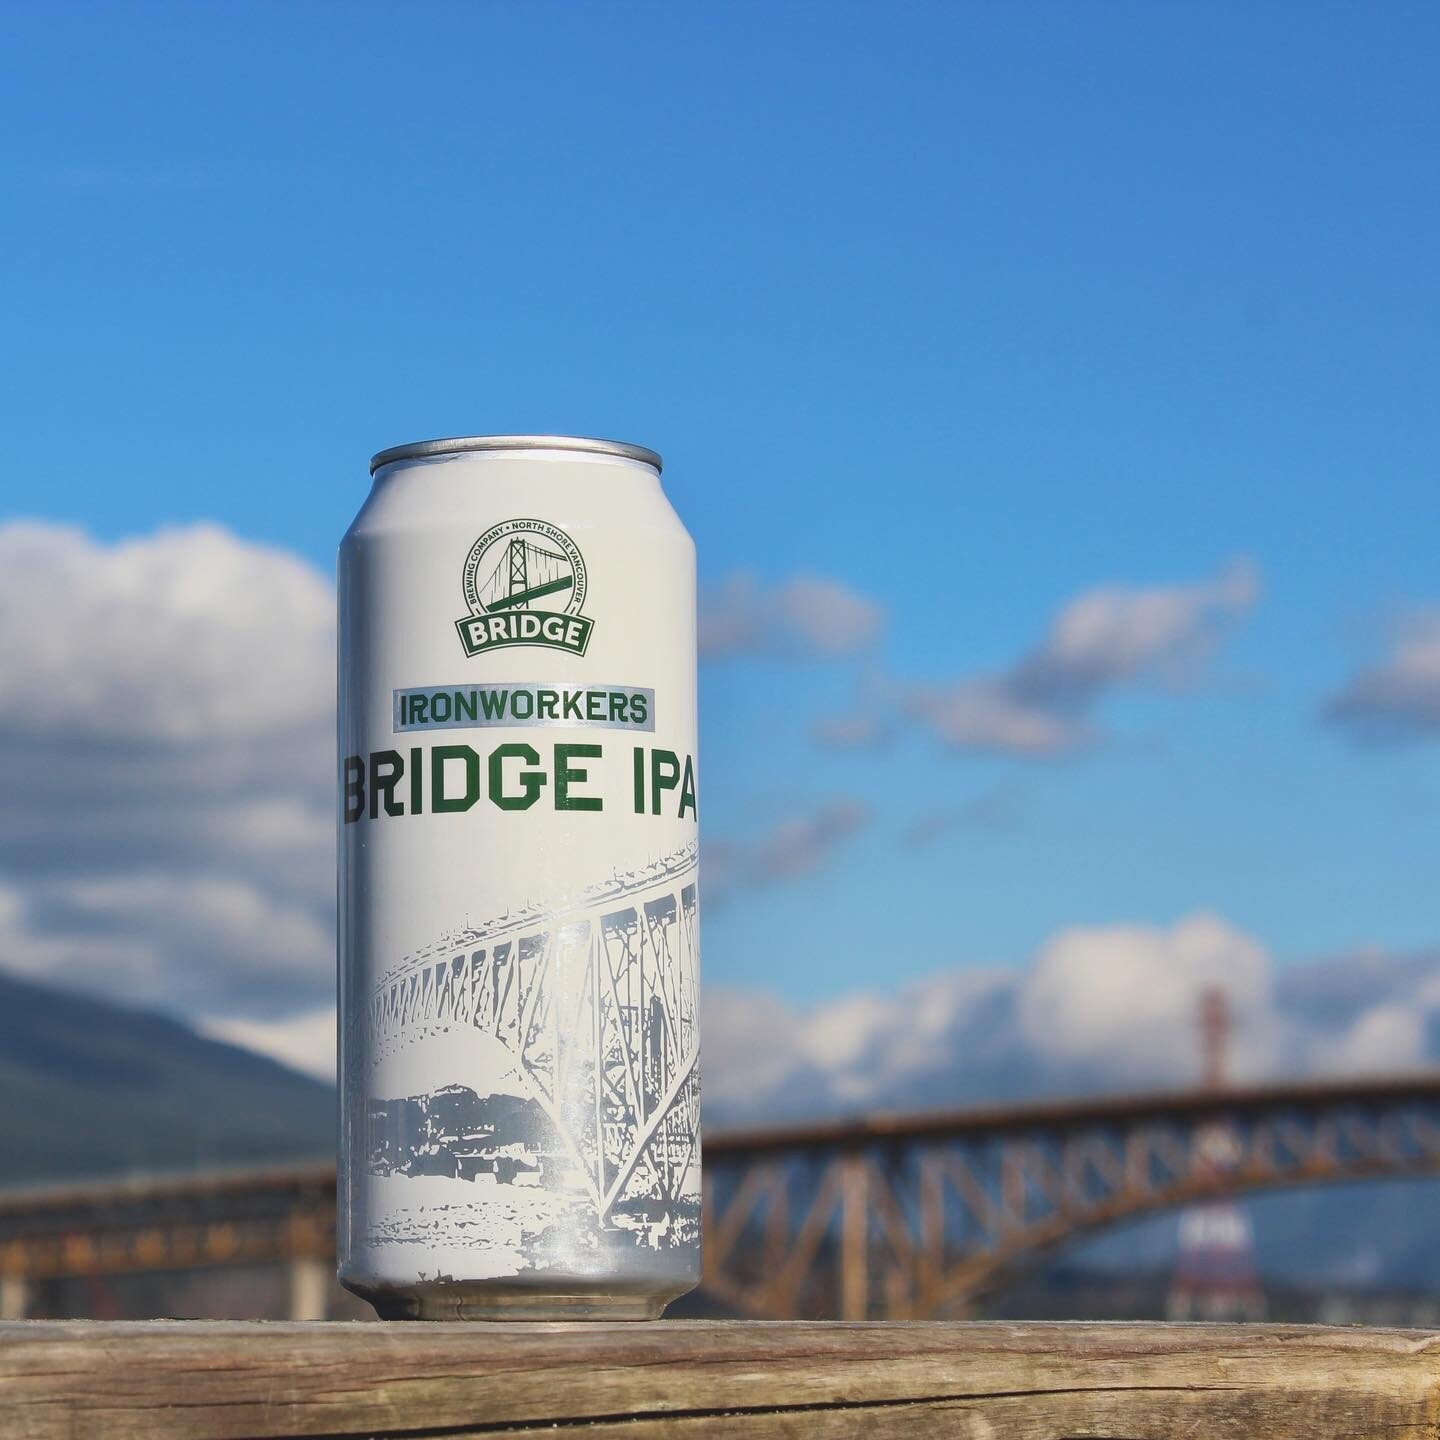 Big, bold, and juicy, our Ironworkers IPA is full of flavour thanks to Sabro and Mosaic hops. This balanced brew is the perfect daily driver for your taste buds! Available at the brewery, @lonsdalebridgedeck, and select liquor stores in BC. 💃🏻🕺🏽